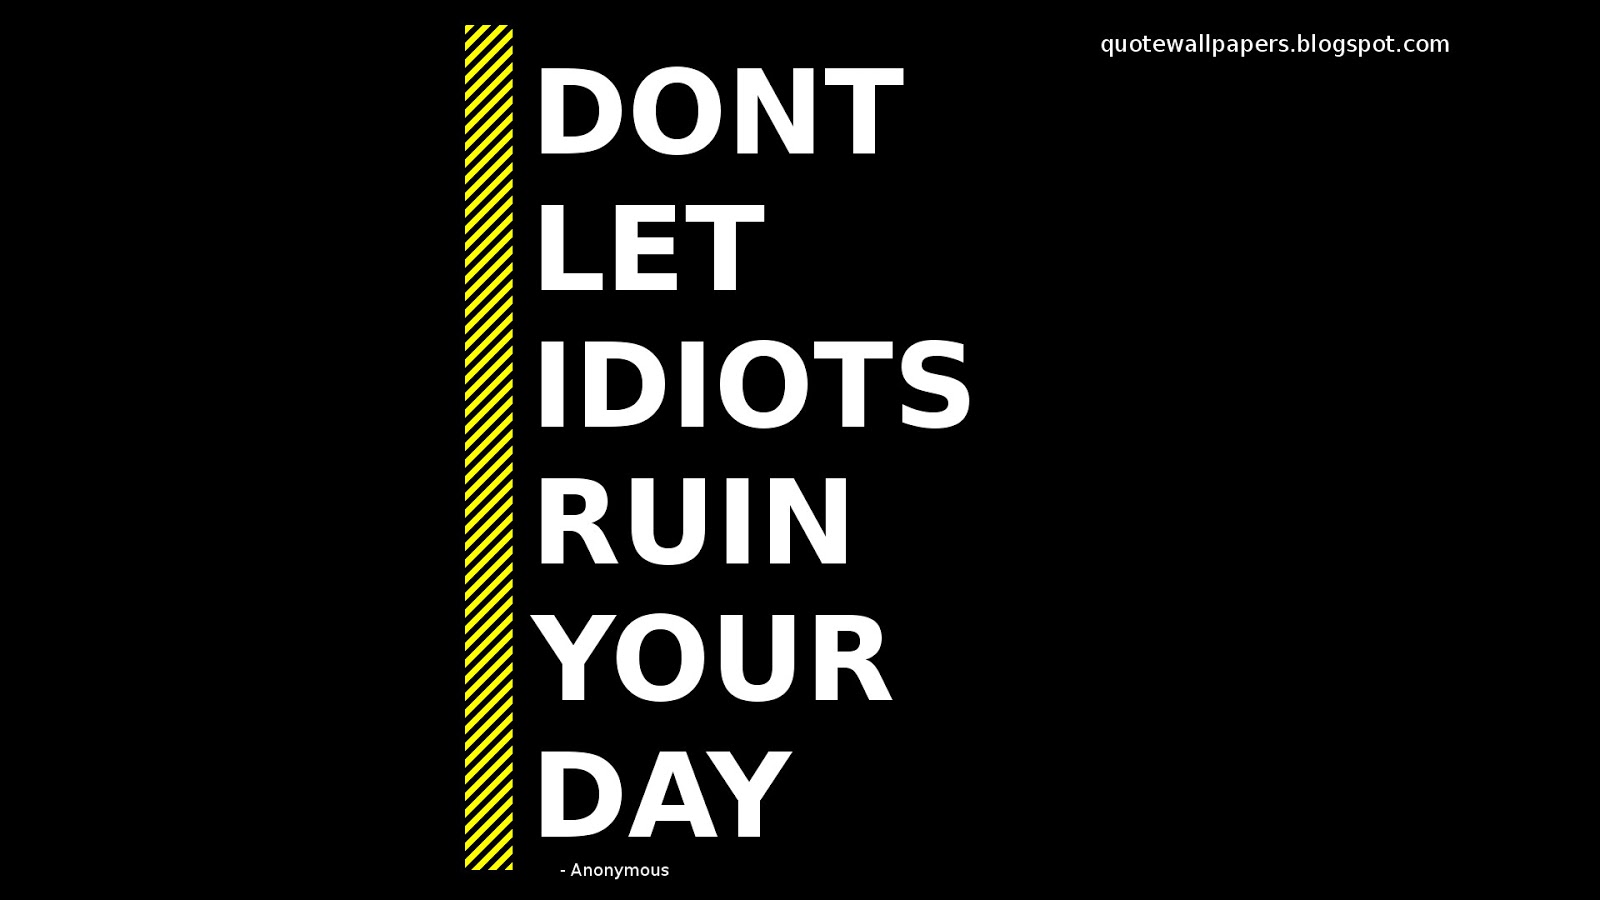 Dont day. Don't Let Idiots Ruin your Day. Don't Let Idiots Ruin your Day перевод. Don't Let Idiots Ruin your Day обои на айфон. Don't Let Idiots Ruin your Day обои на рабочий.